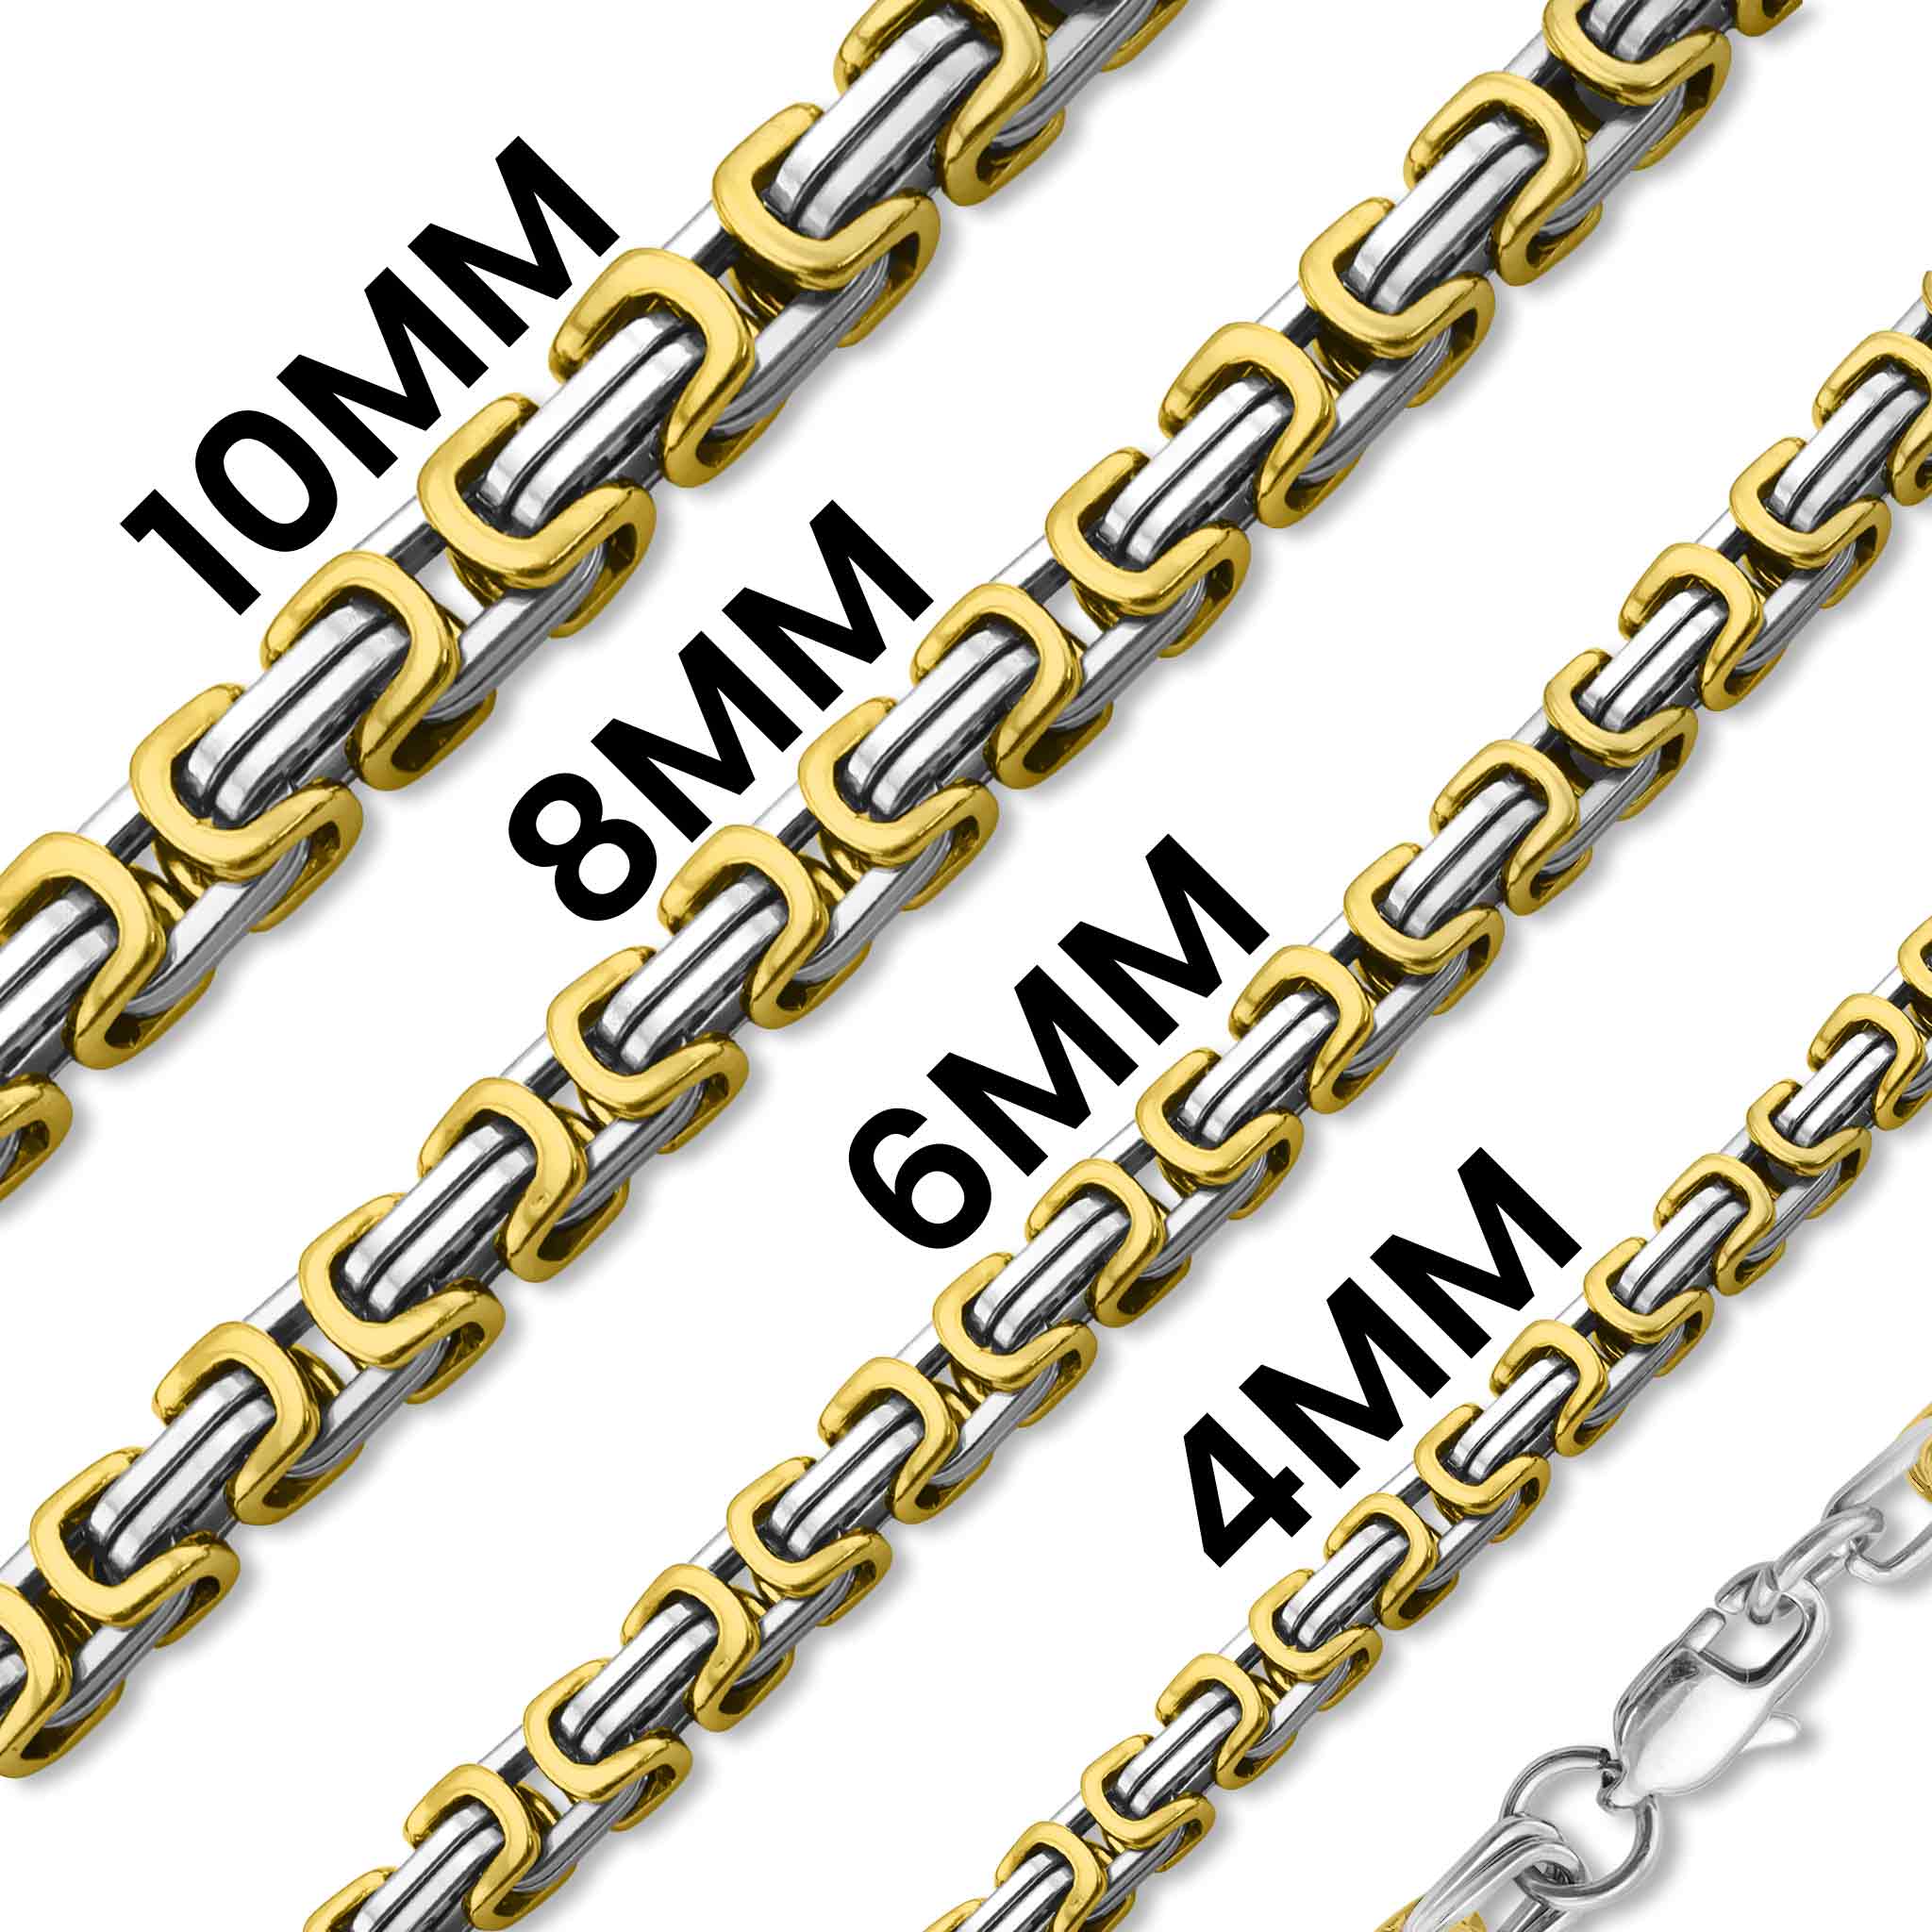 Necklaces Gold Stainless Steel Byzantine Chain Necklace Chn8504 10mm / 24 Wholesale Jewelry Website Unisex